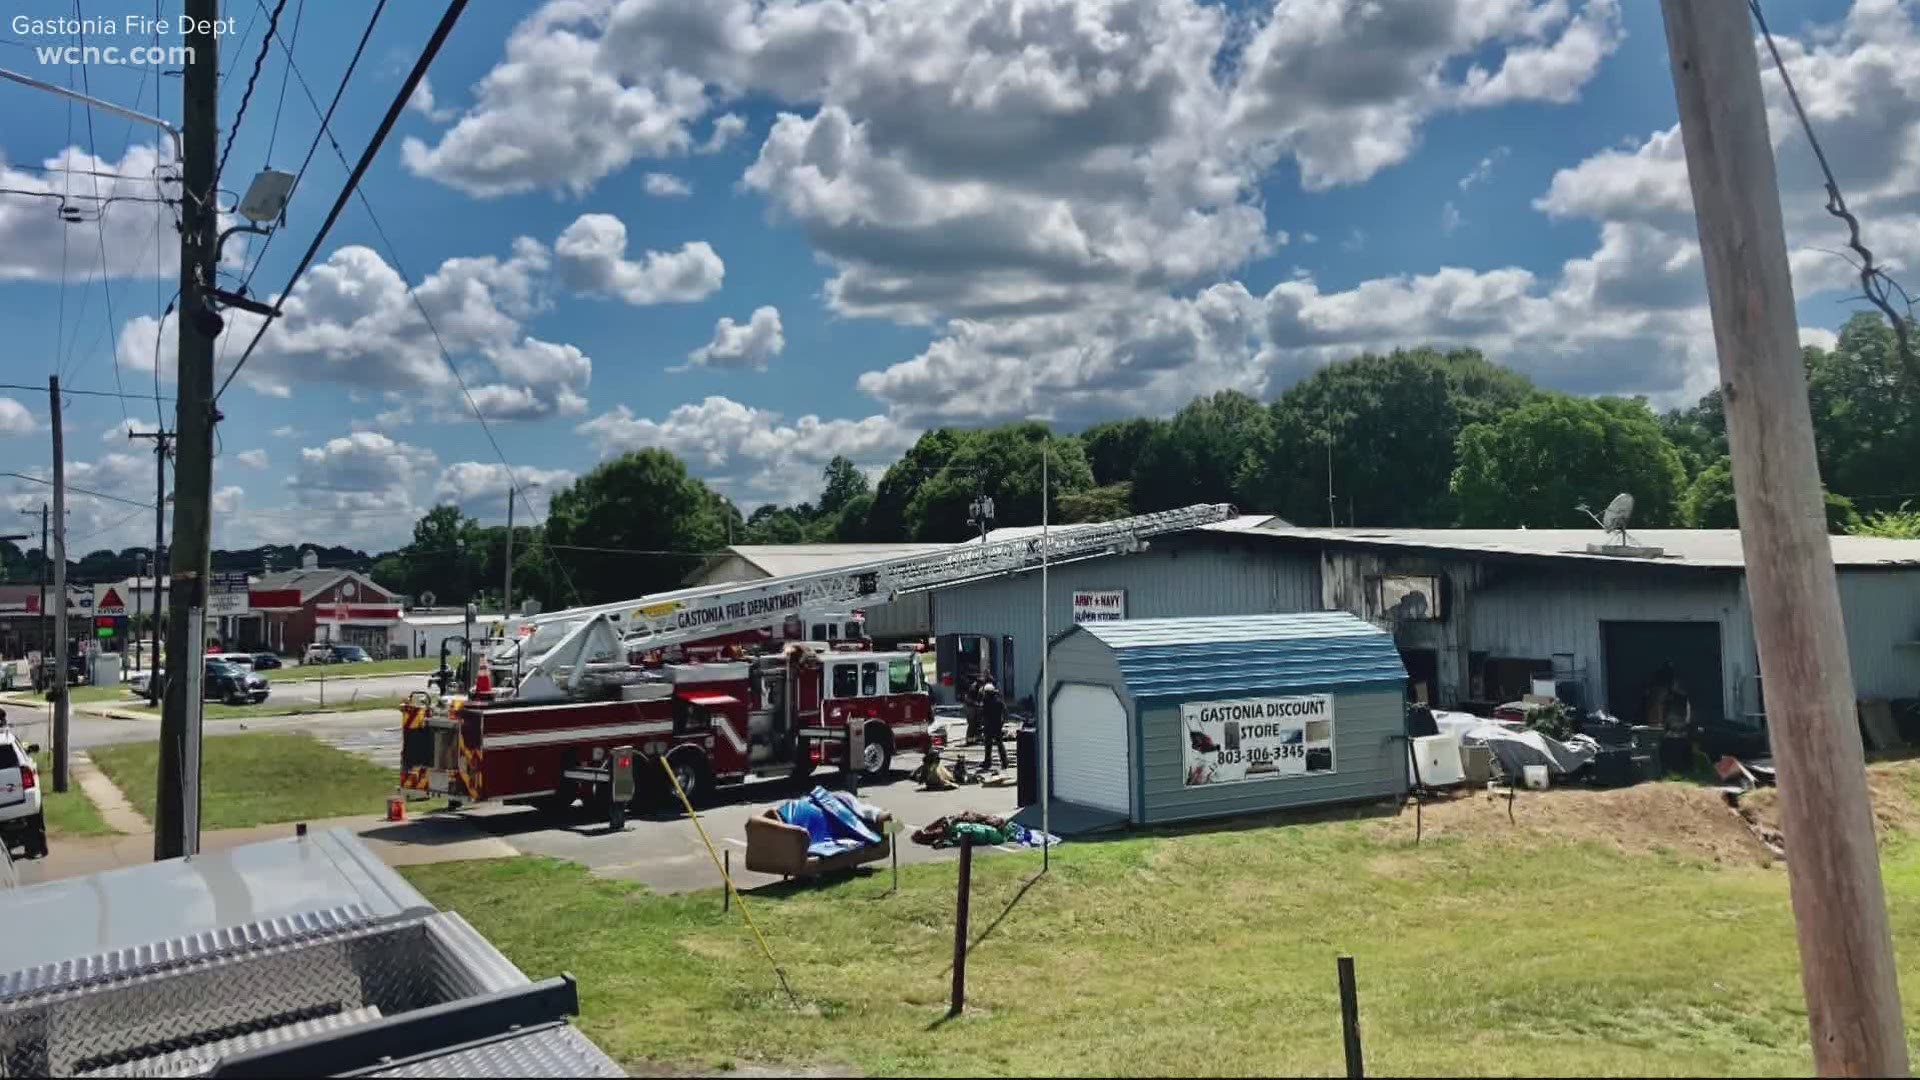 According to the Gastonia Fire Department, the cause of the fire was determined to be accidental.